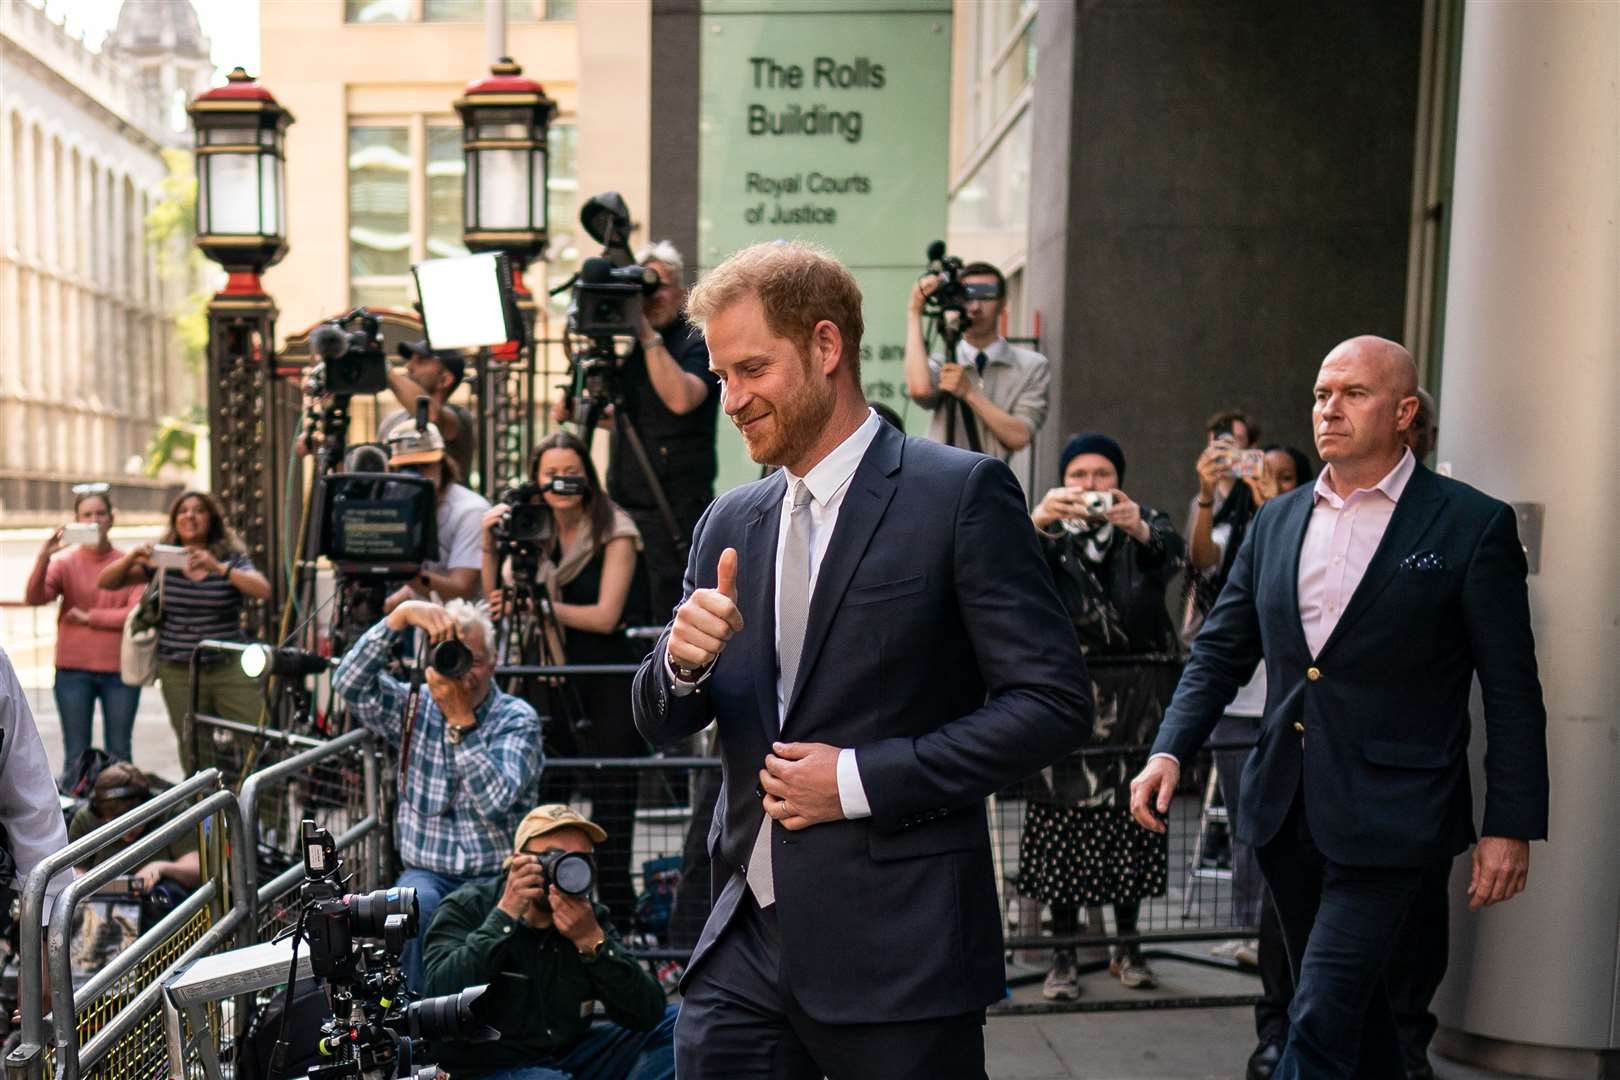 The Duke of Sussex leaving the High Court in London after giving evidence in the phone hacking trial against Mirror Group Newspapers (MGN) earlier this year (Victoria Jones/PA)